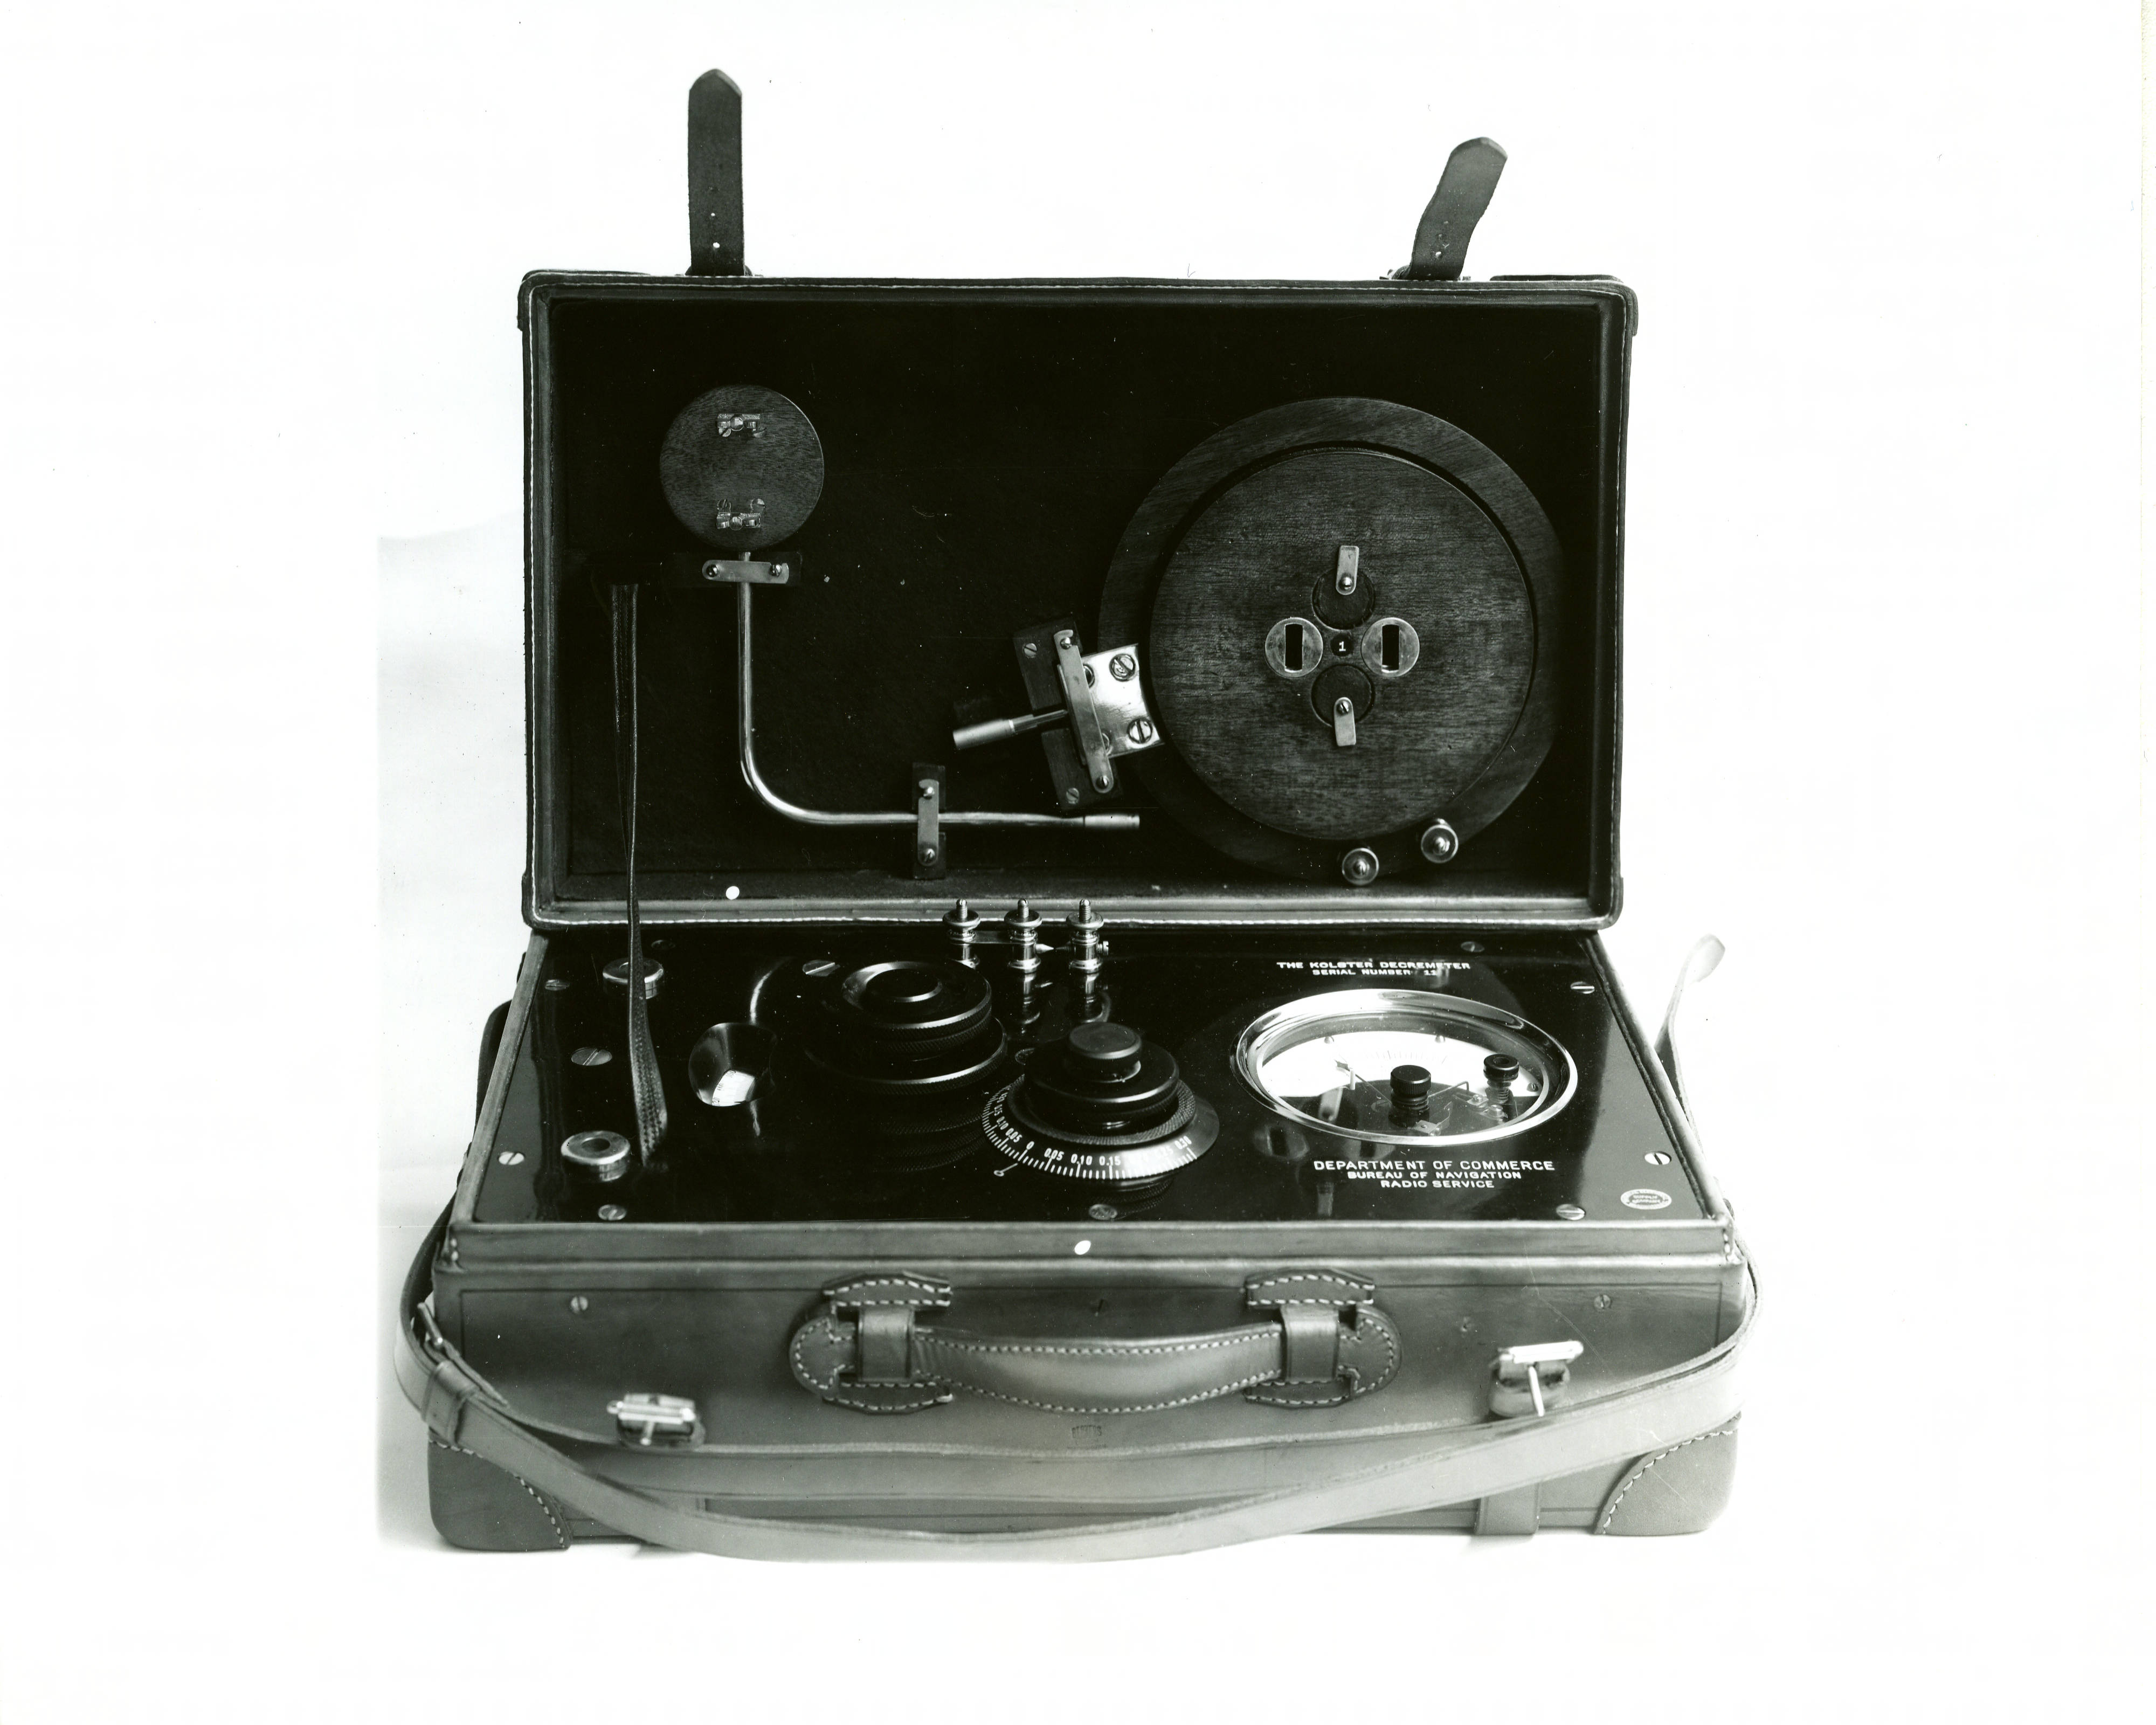 Historical photo shows scientific device in an open case, with dials and receivers.